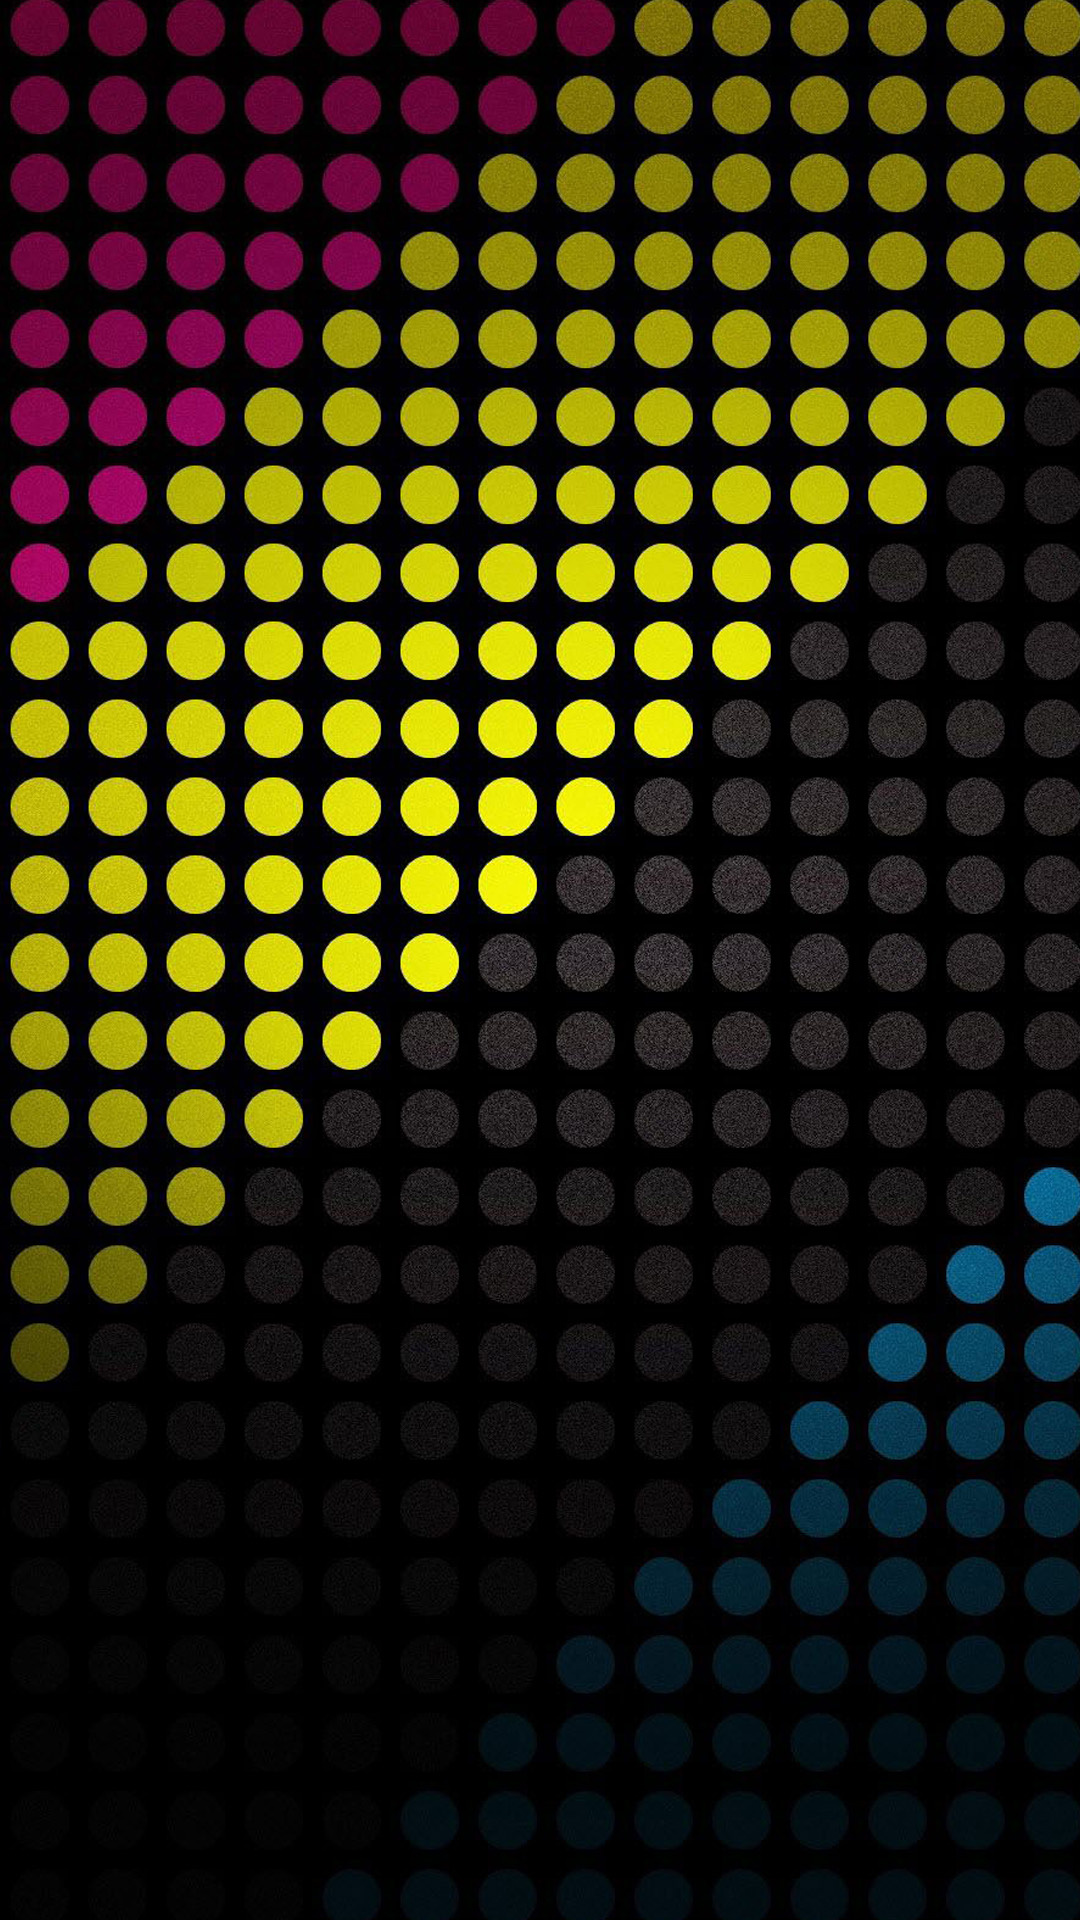 Abstract dots, Android wallpaper, Colorful design, Digital art, 1080x1920 Full HD Handy